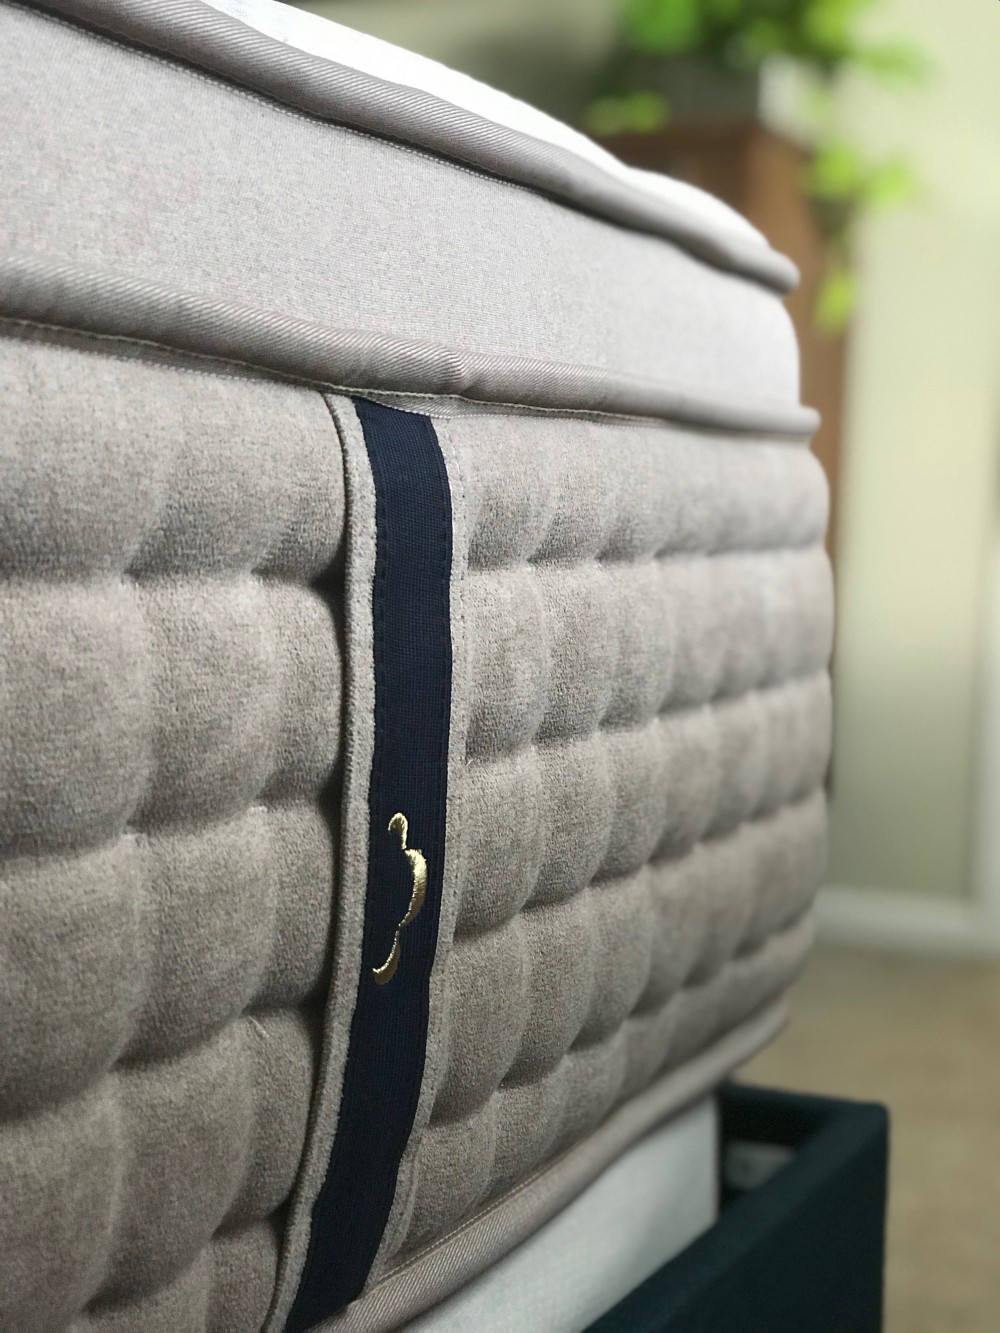 DreamCloud Mattress : Reviewed &#038; Rated&#8230;Plus 2019 Coupons